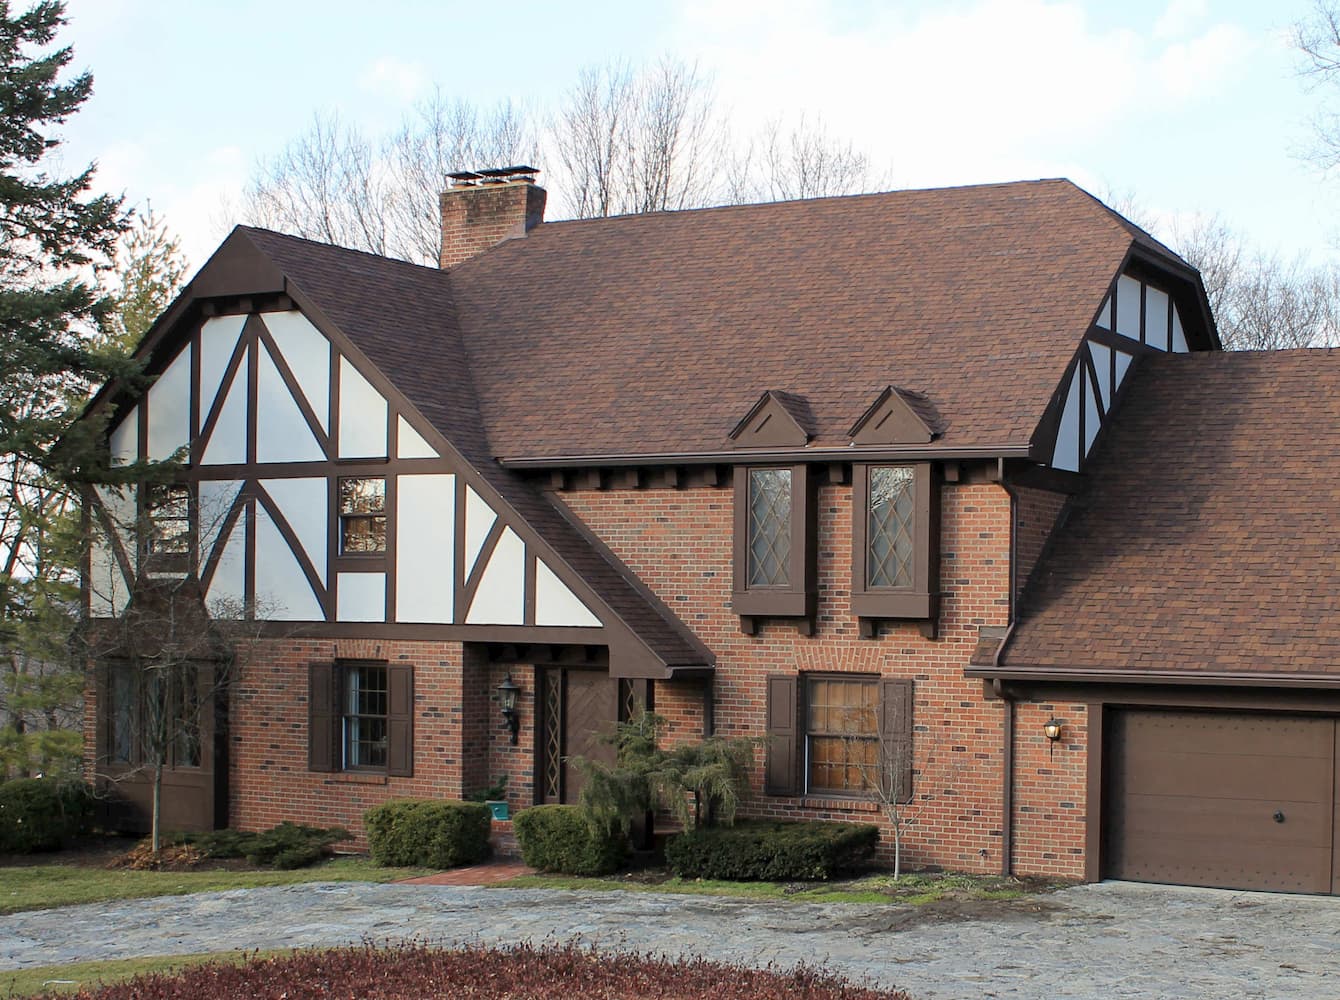 Tudor-style home in Kettering, Ohio, with all new Pella windows.